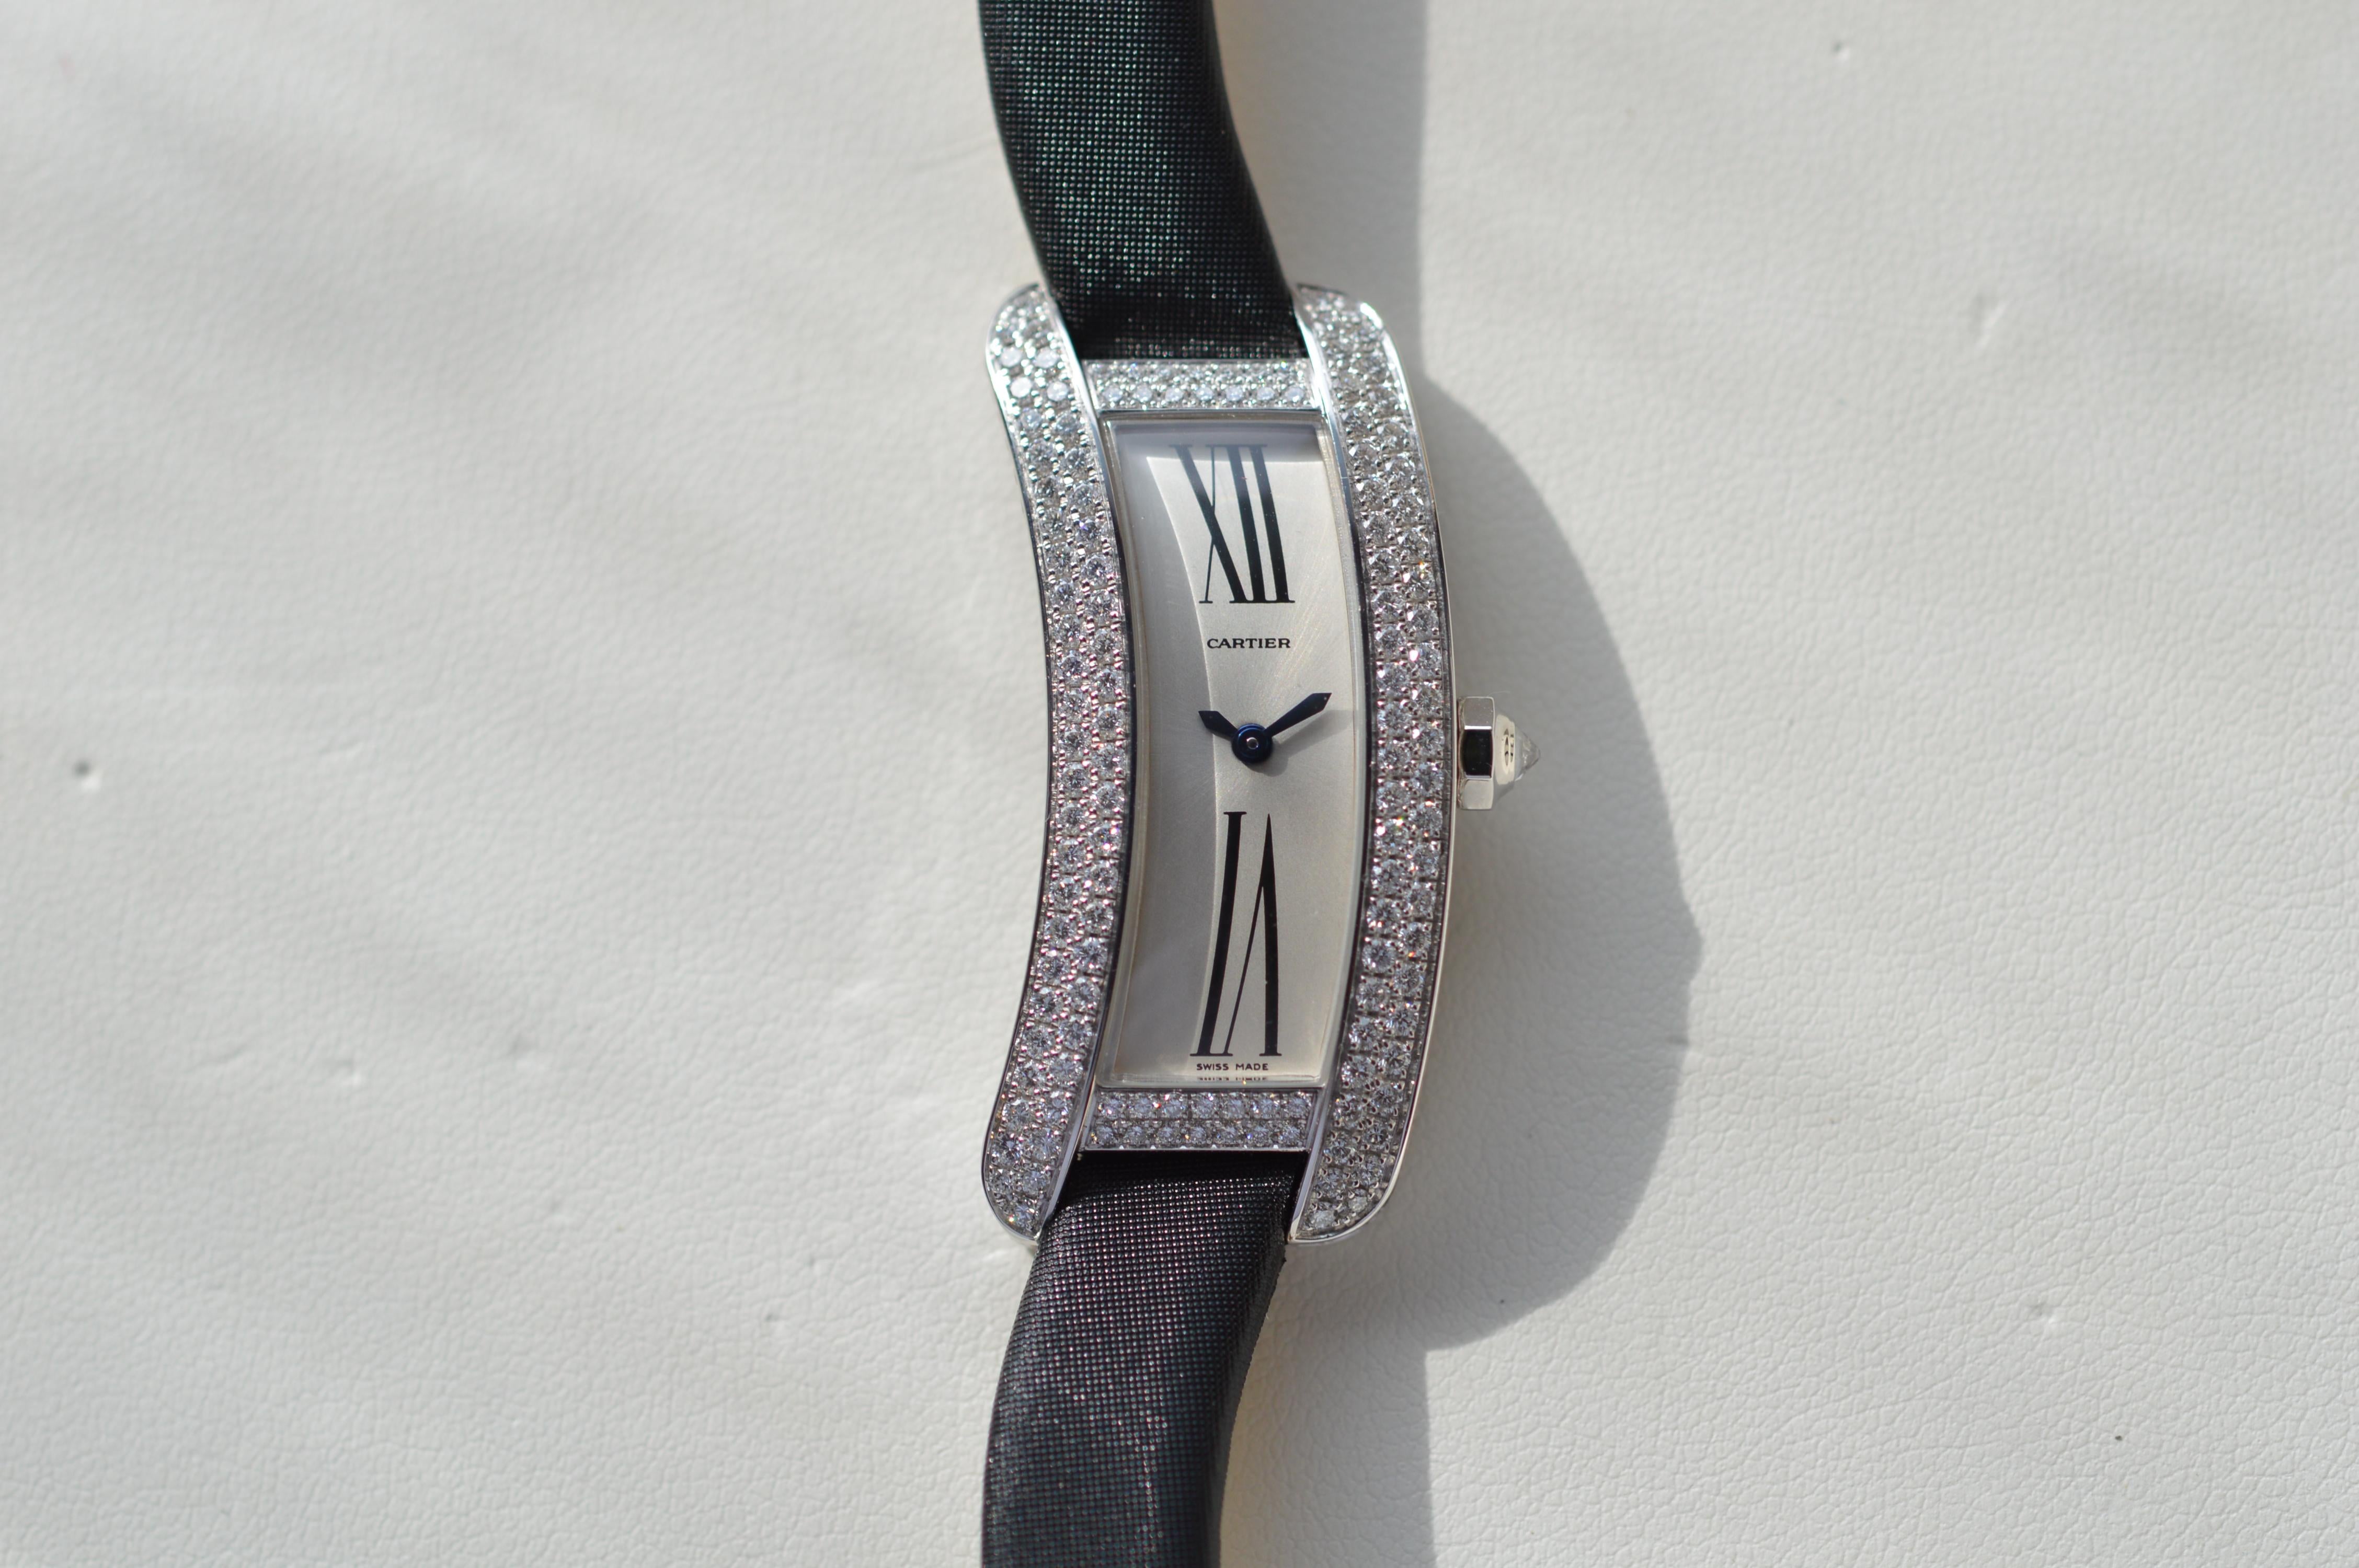 Cartier Libre Tank S Curved in 18K White Gold with Satin Strap
From the Cartier Libre Collection
Reference n° WJ300950
40mm X 13mm Size
18K White Gold Case
Black Satin Strap
Diamond Crown
Diamond Buckle
Diamond Case
325 Top Wesselton Diamonds for a